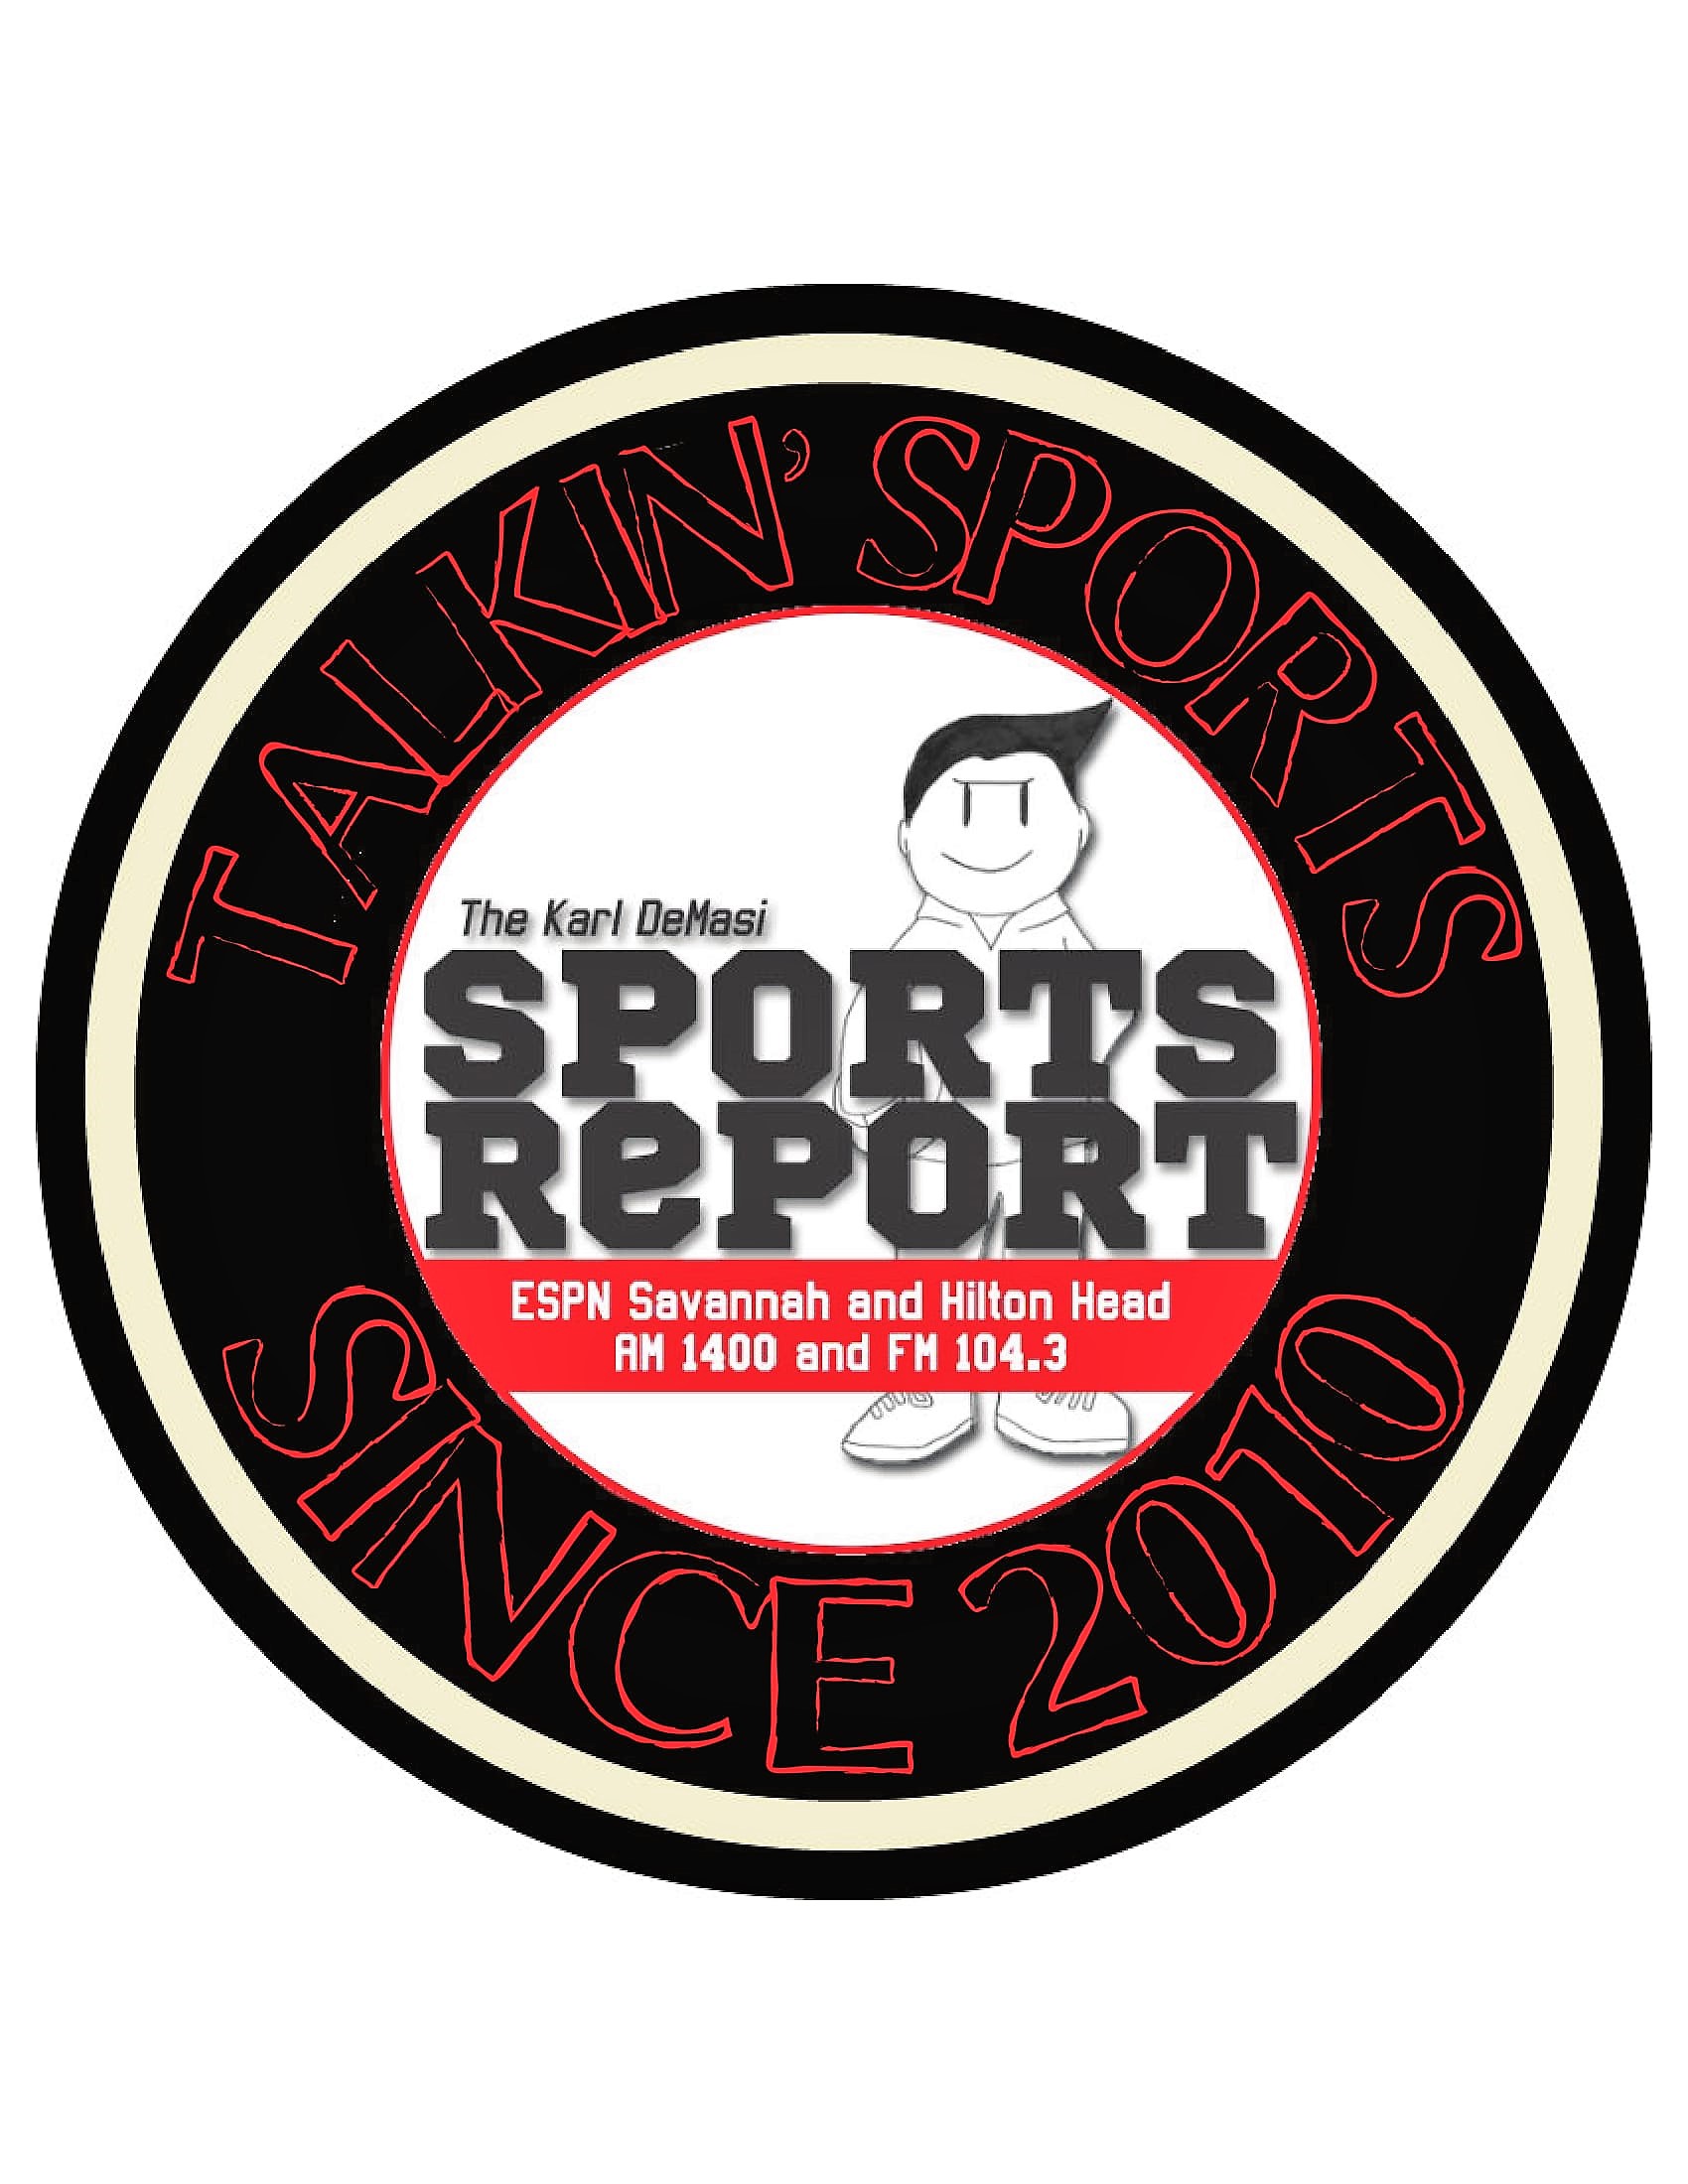 The Karl DeMasi Sports Report Show High School Football Preview Show with 